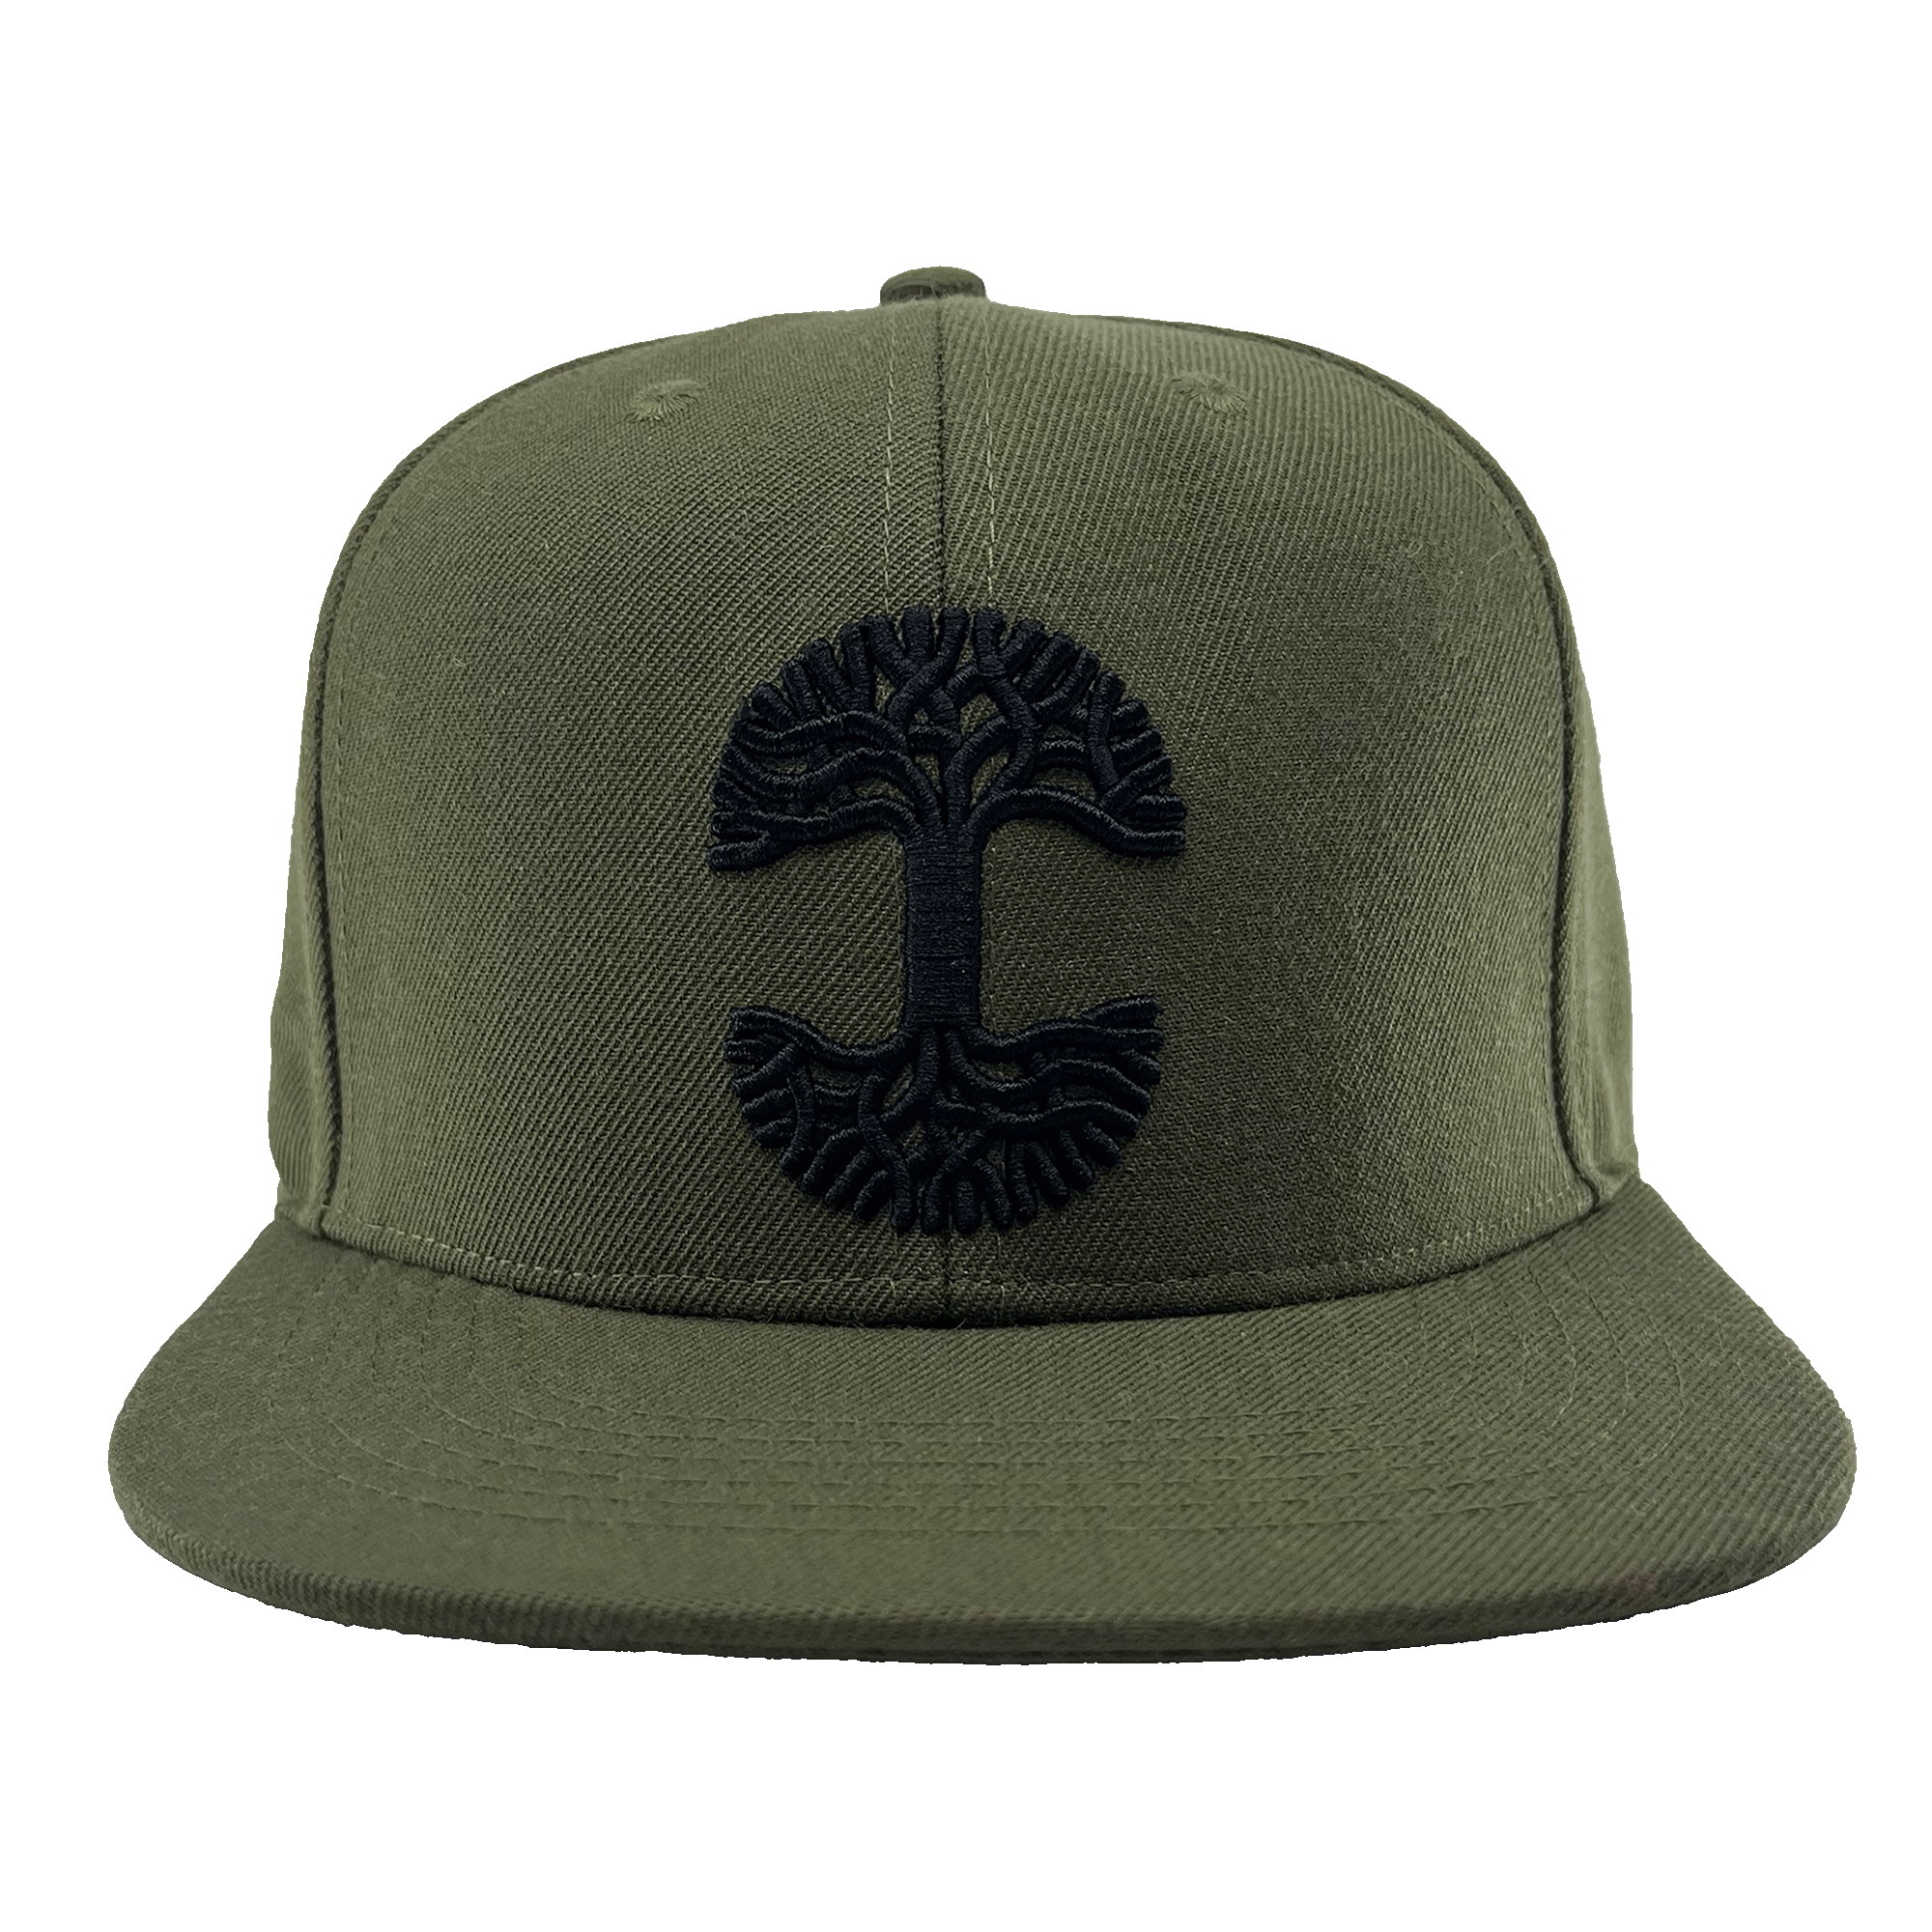 Front view of green snapback hat with black embroidered Oaklandish tree logo on the crown and flat square bill.